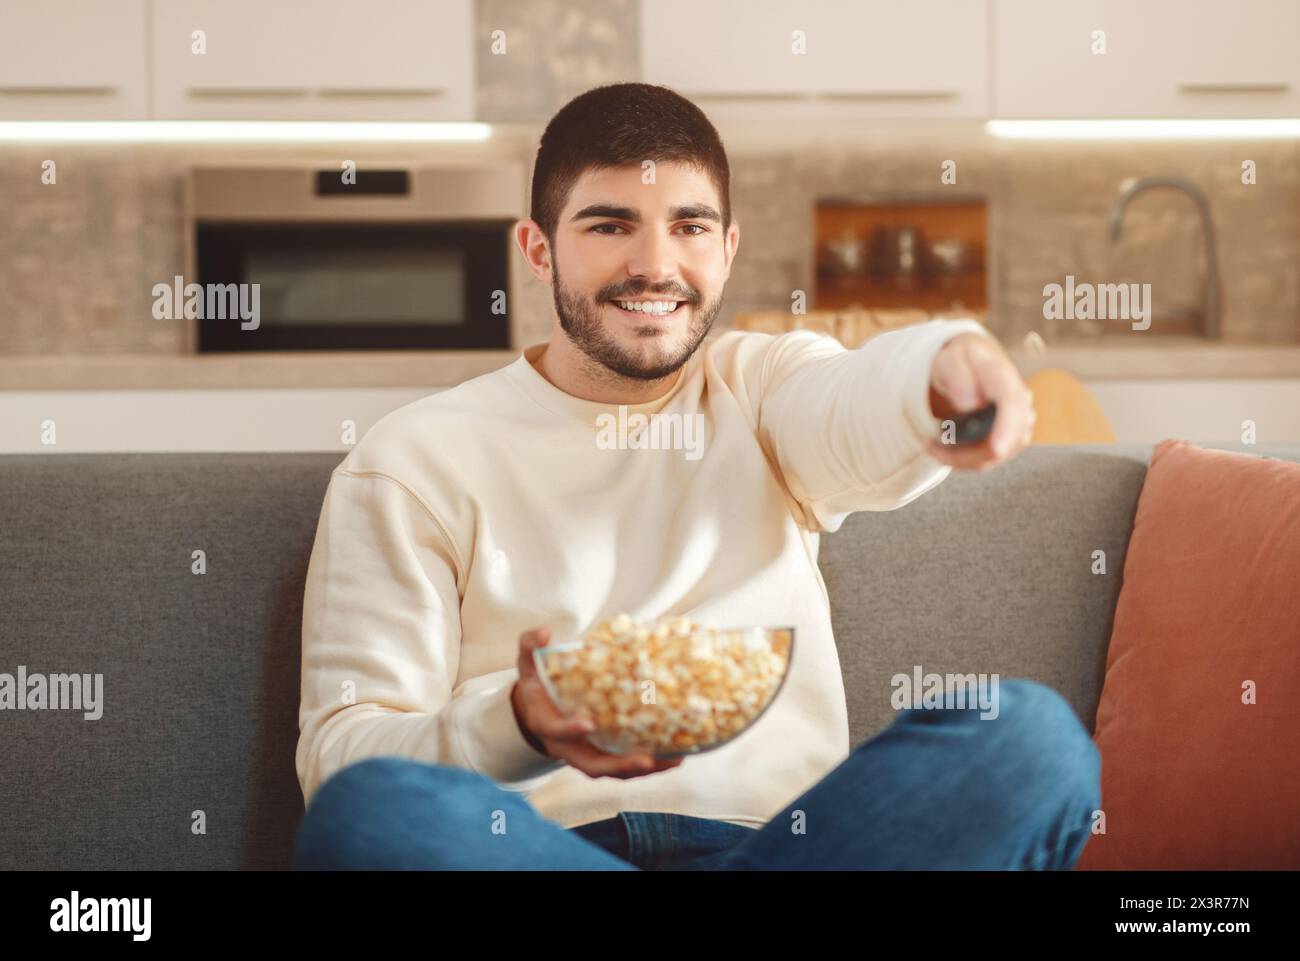 Man Sitting on Couch Holding Bowl of Popcorn, Watching TV Stock Photo